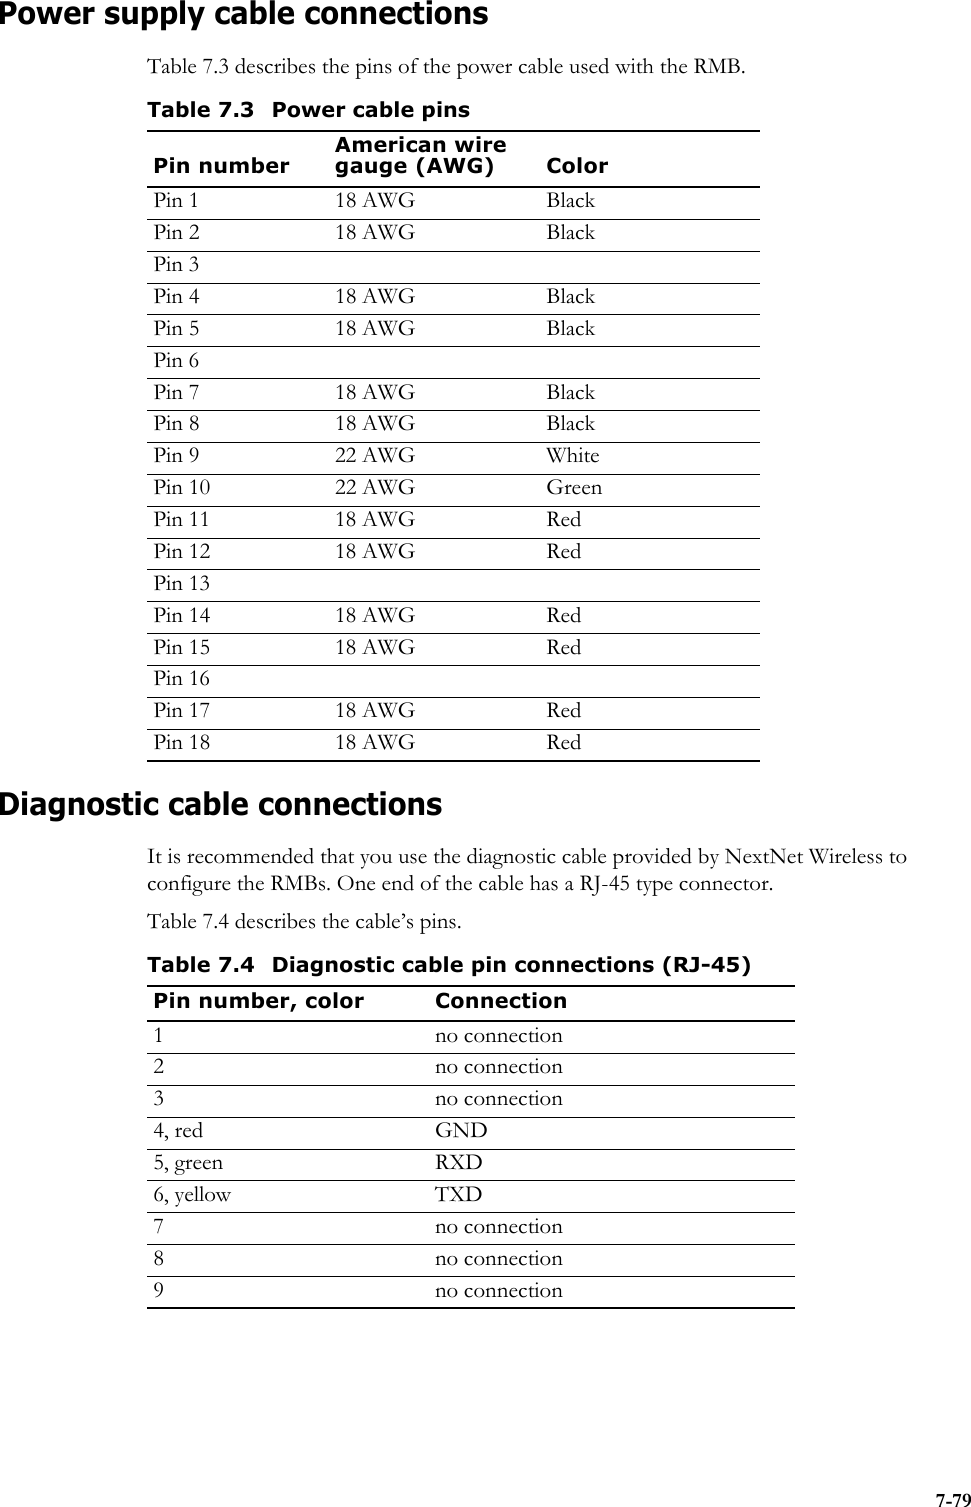 7-79Power supply cable connectionsTable 7.3 describes the pins of the power cable used with the RMB.Diagnostic cable connectionsIt is recommended that you use the diagnostic cable provided by NextNet Wireless to configure the RMBs. One end of the cable has a RJ-45 type connector.Table 7.4 describes the cable’s pins.Table 7.3 Power cable pinsPin numberAmerican wire gauge (AWG) ColorPin 1 18 AWG BlackPin 2 18 AWG BlackPin 3Pin 4 18 AWG BlackPin 5 18 AWG BlackPin 6Pin 7 18 AWG BlackPin 8 18 AWG BlackPin 9 22 AWG WhitePin 10 22 AWG Green Pin 11 18 AWG RedPin 12 18 AWG RedPin 13Pin 14 18 AWG RedPin 15 18 AWG RedPin 16Pin 17 18 AWG RedPin 18 18 AWG RedTable 7.4 Diagnostic cable pin connections (RJ-45)Pin number, color Connection1 no connection2 no connection3 no connection4, red GND5, green RXD6, yellow TXD7 no connection8 no connection9 no connection